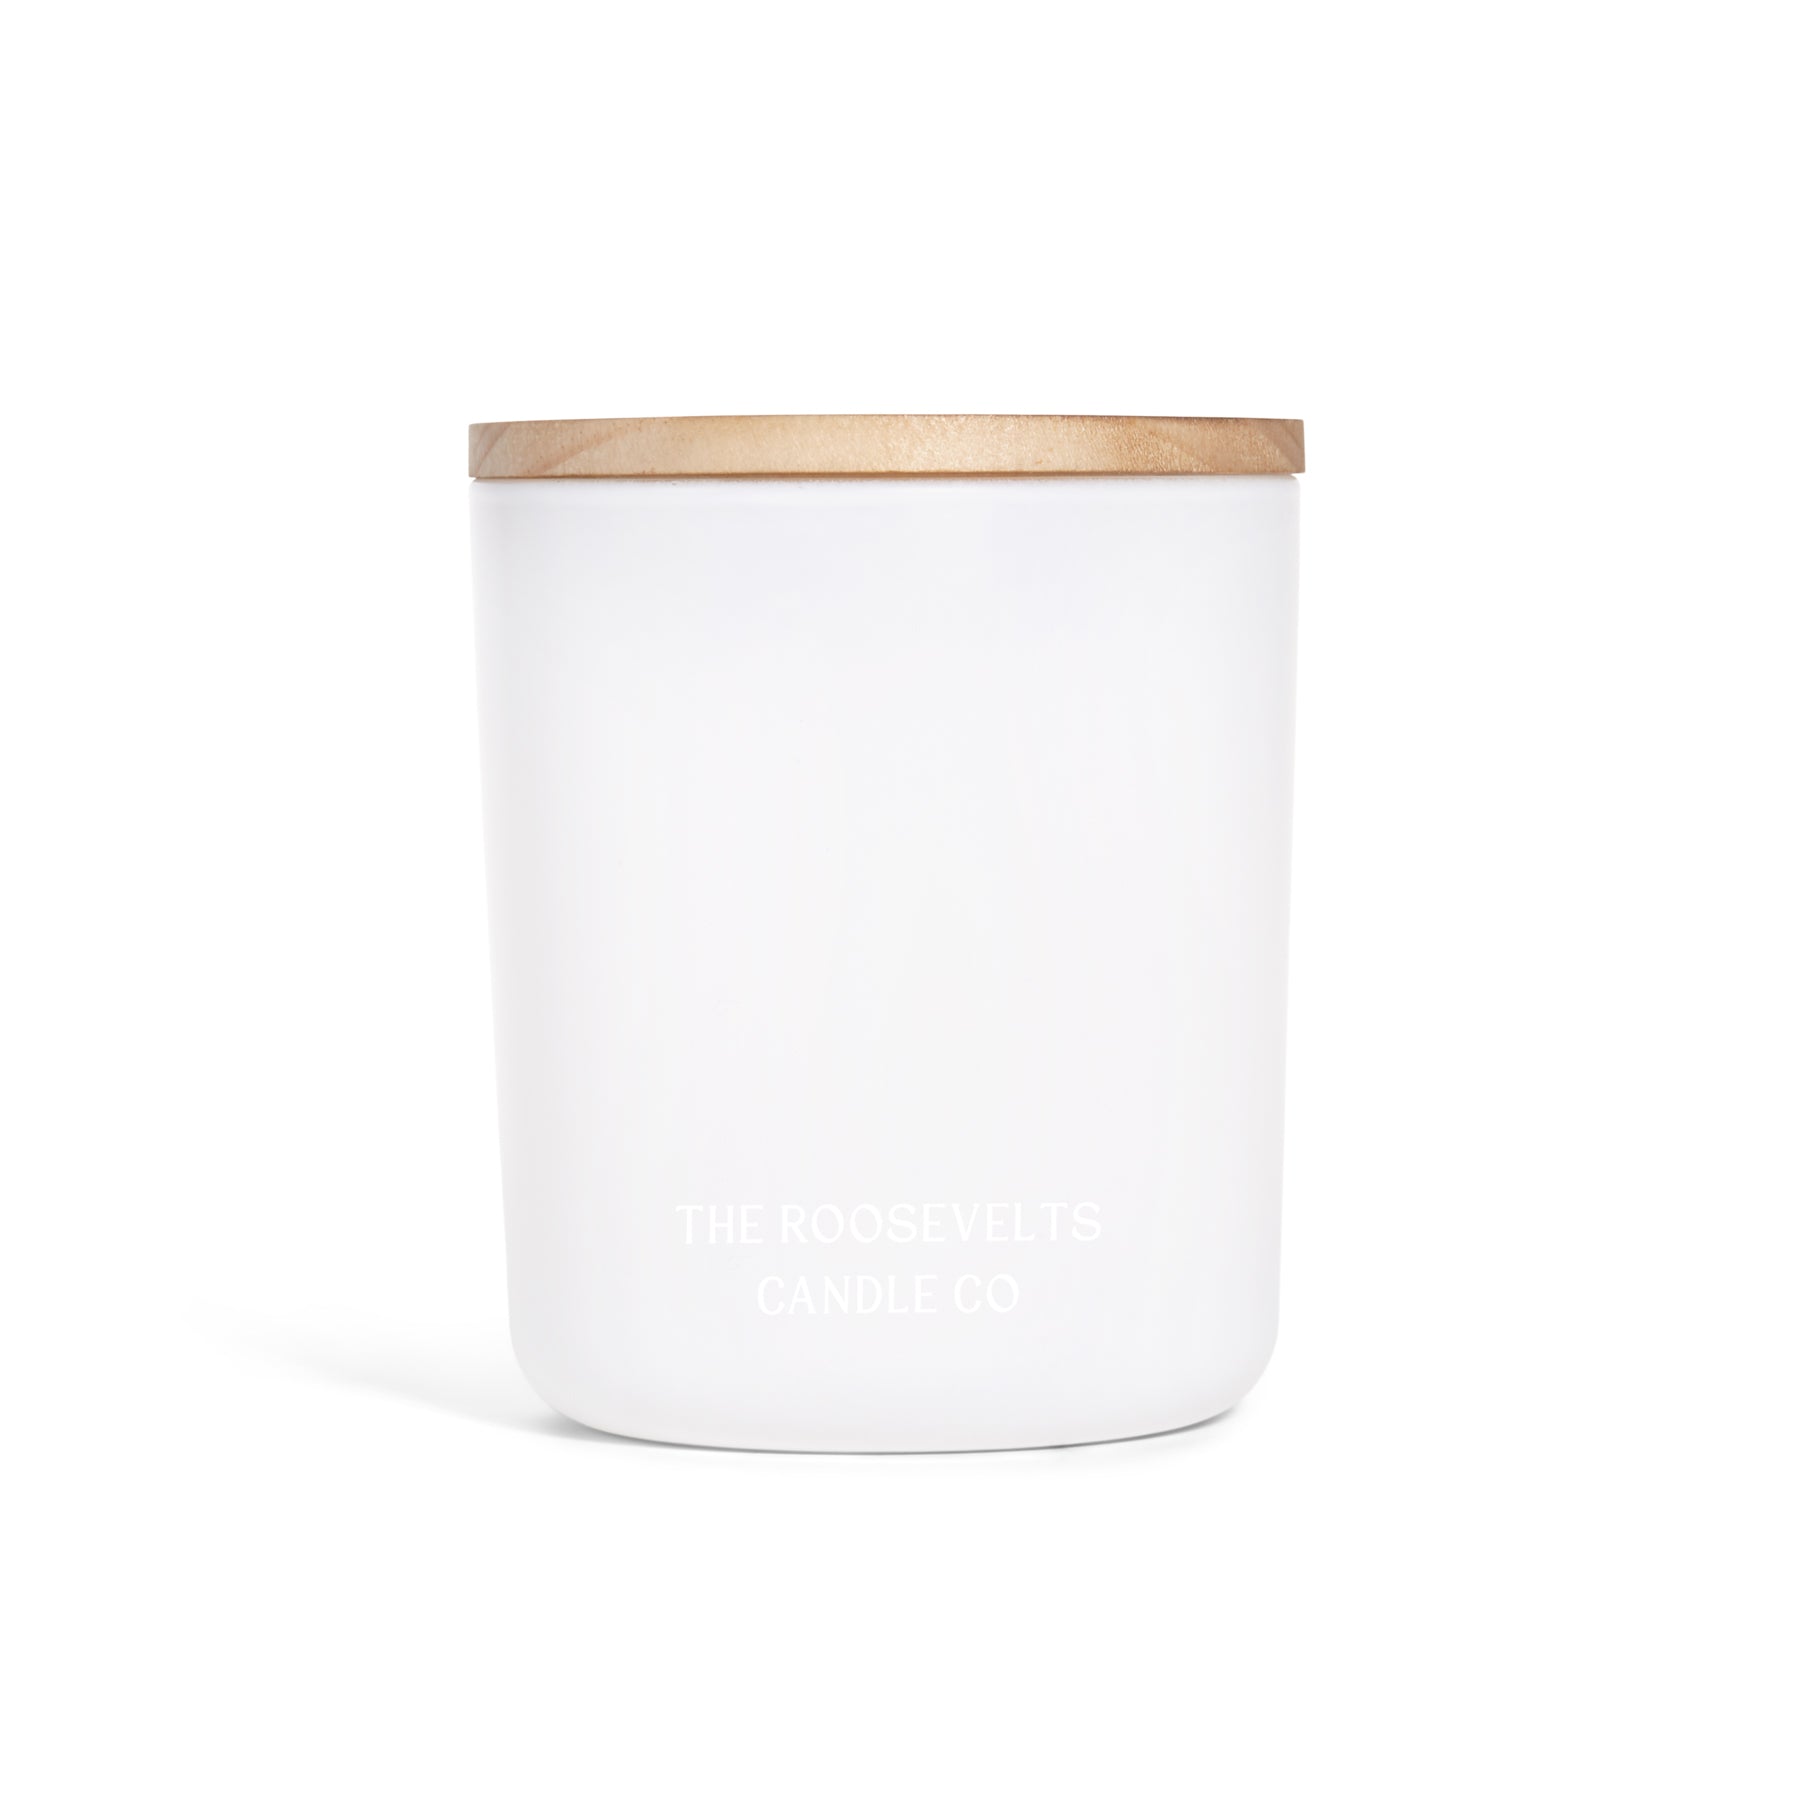 Zion Candle - The Roosevelts Candle Co.